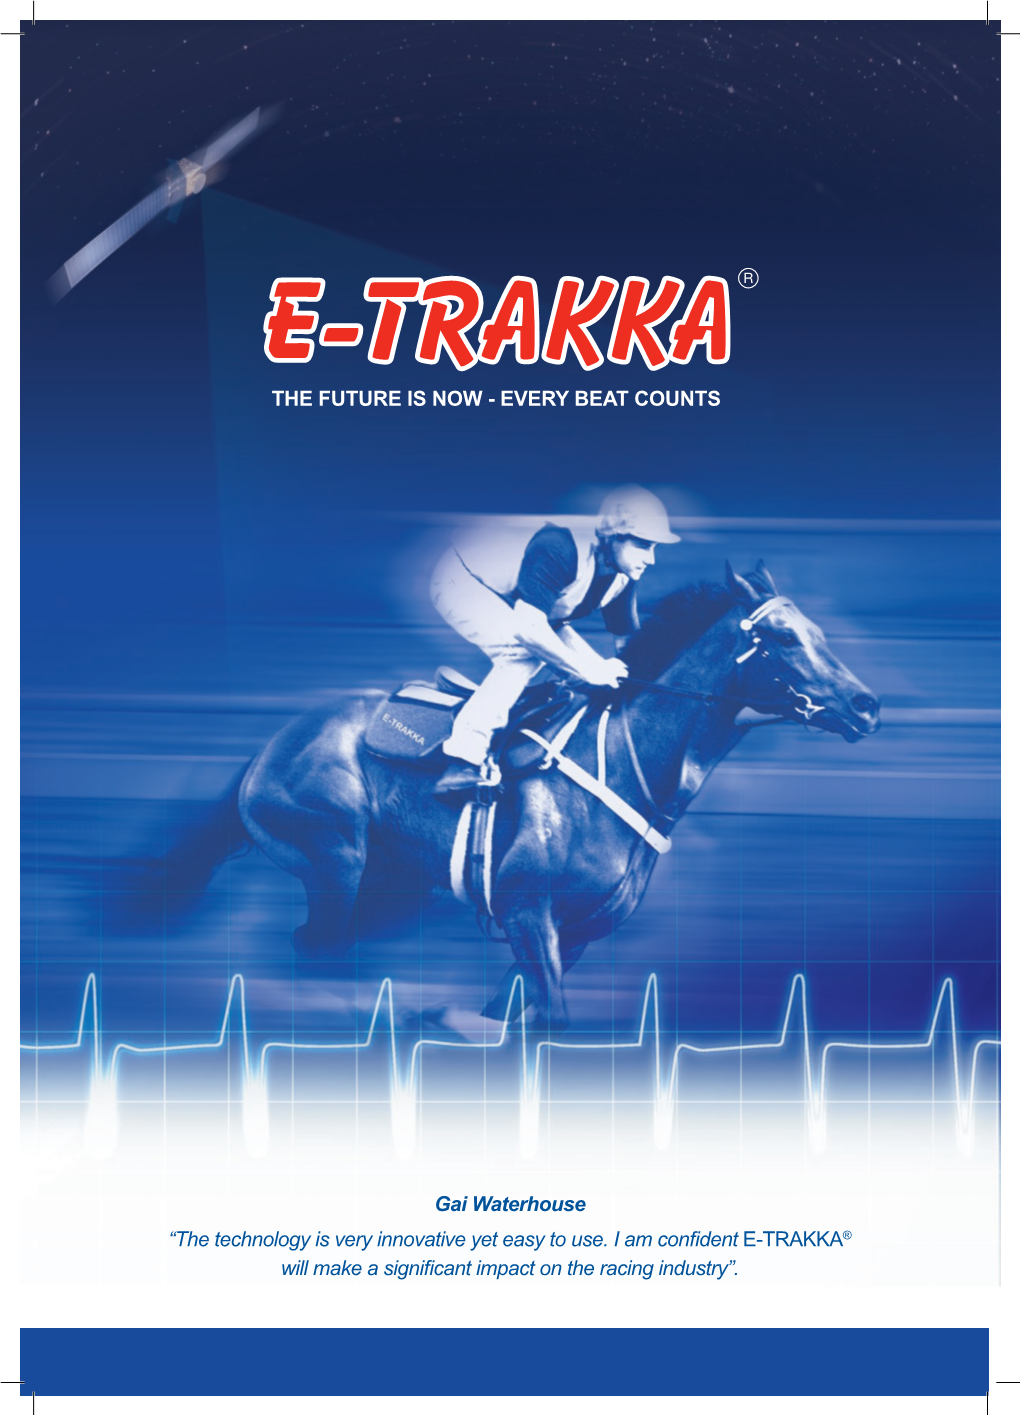 Gai Waterhouse “The Technology Is Very Innovative Yet Easy to Use. I Am Confident E-TRAKKA® Will Make a Significant Impact on the Racing Industry”